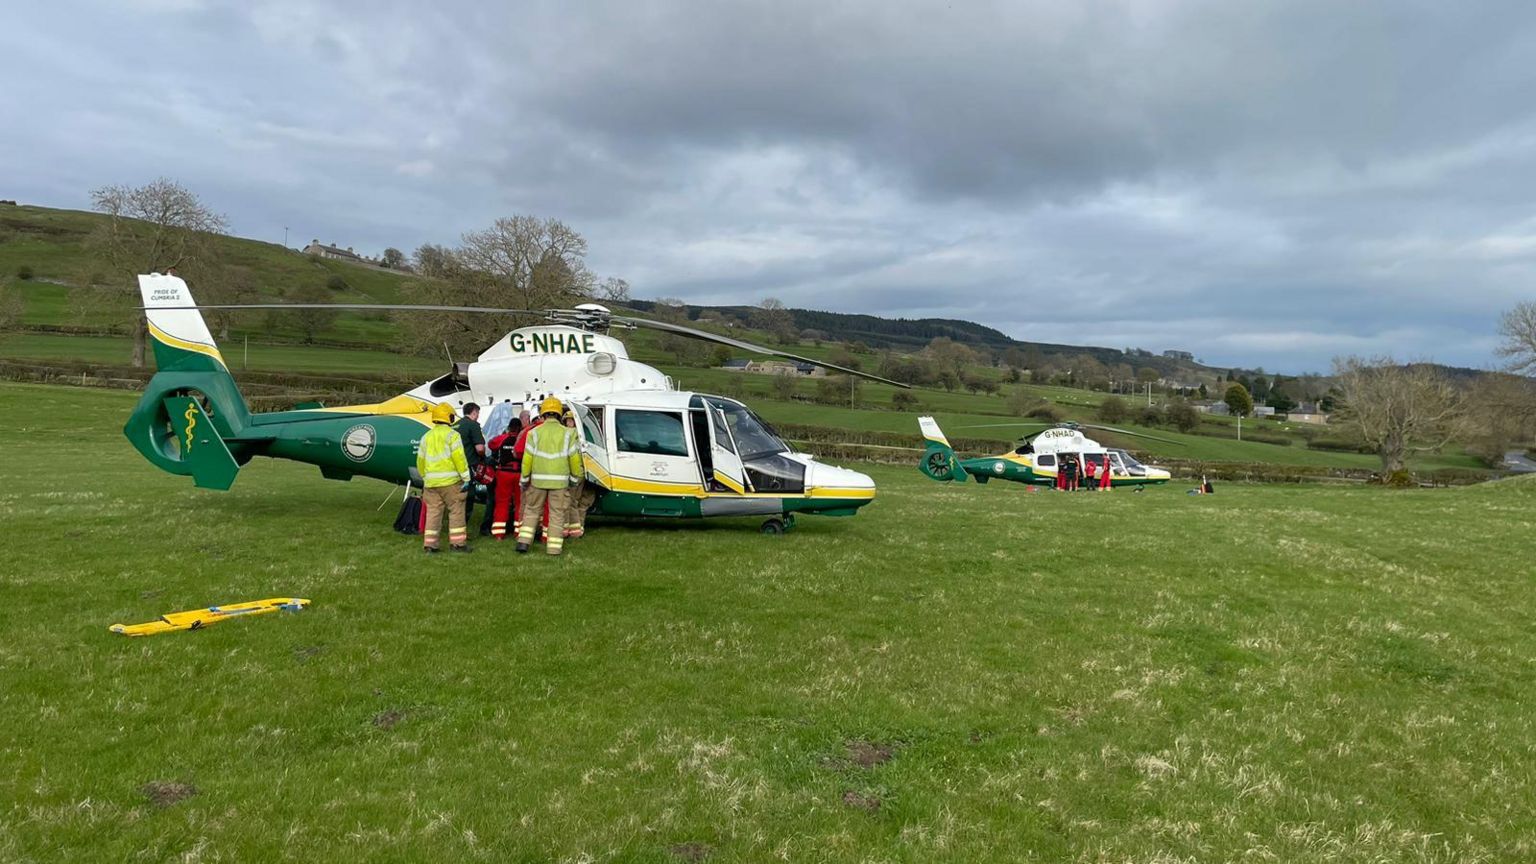 Two helicopters in a field with paramedics loading the teenagers on